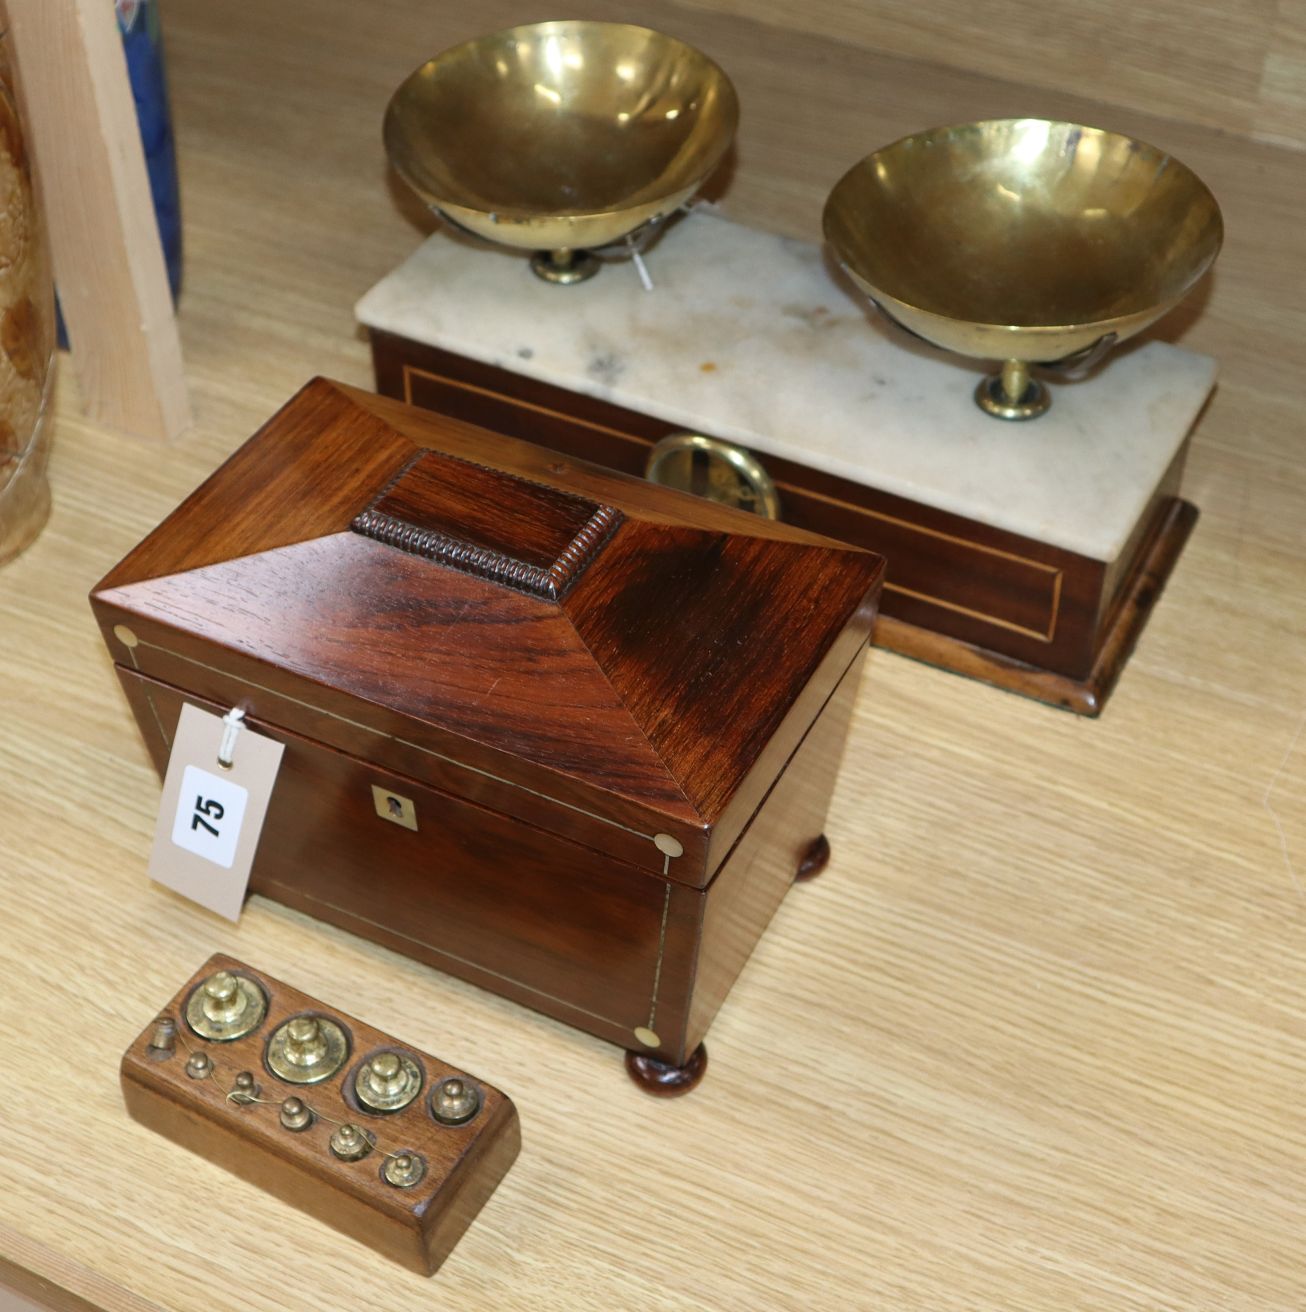 A set of 19th century French brass and mahogany scales with metric weights and a 19th century